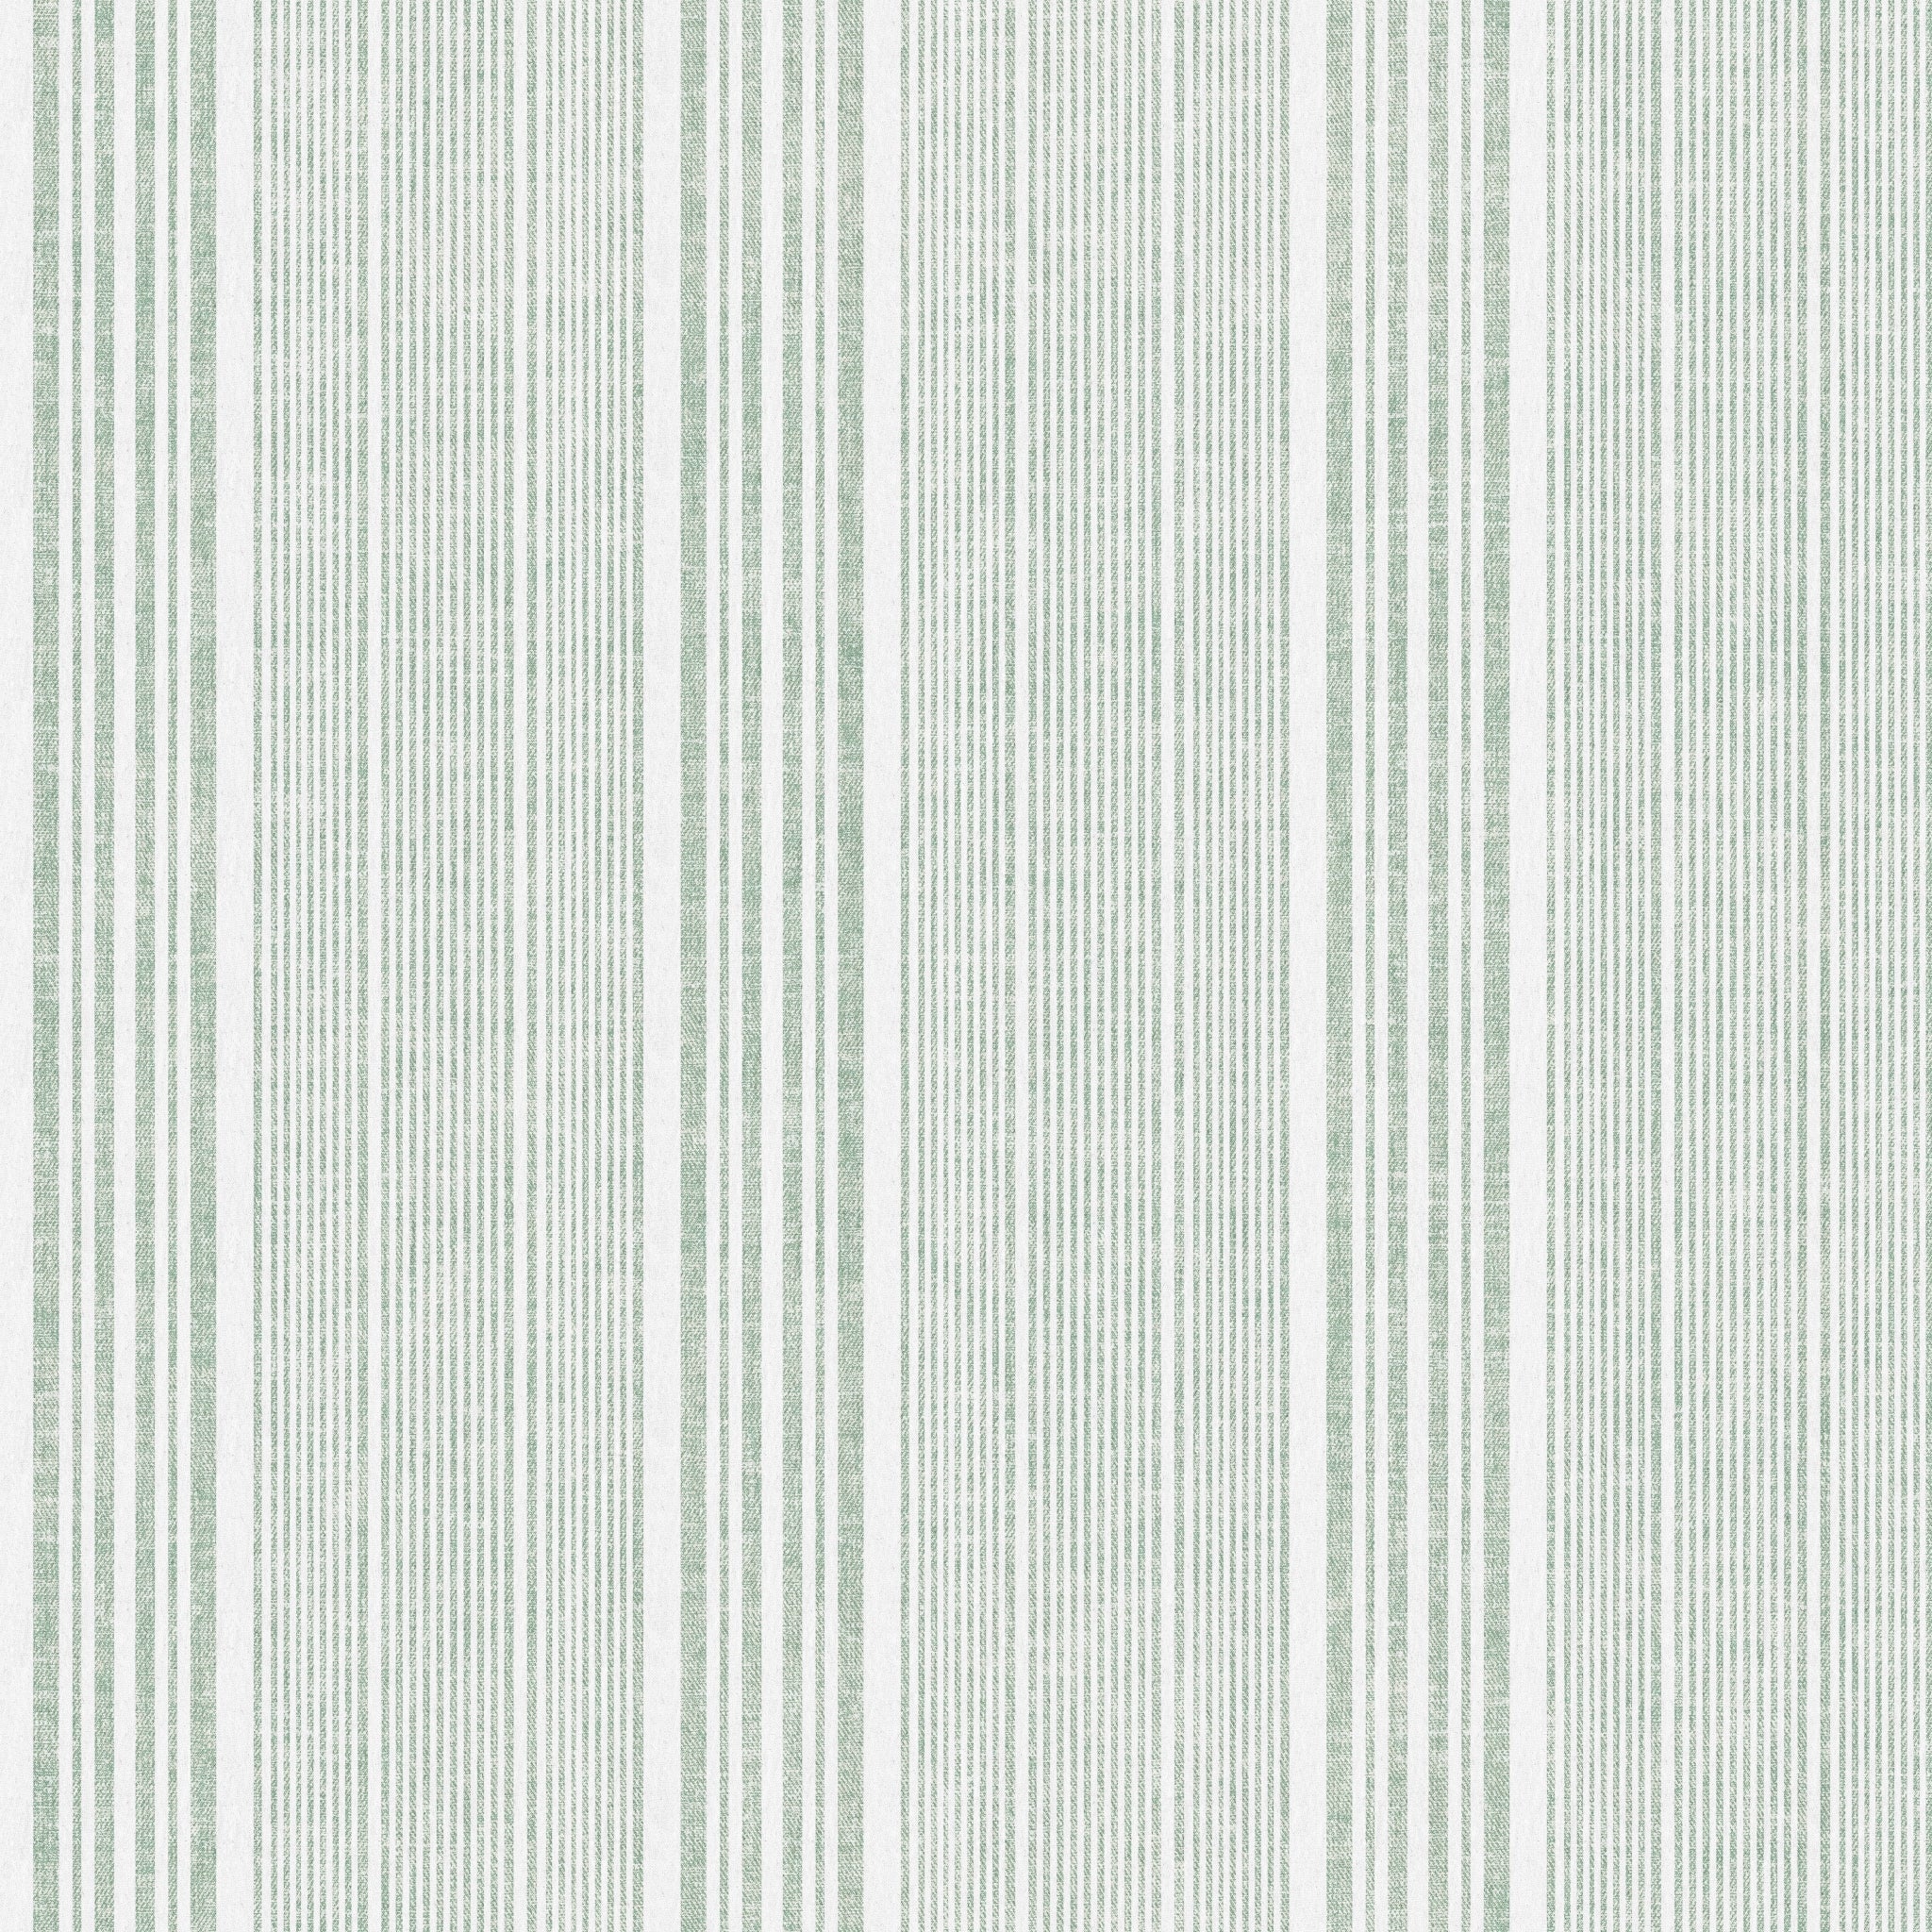 "Wall Blush Small Town Wallpaper with a green striped pattern for a modern living room ambiance."